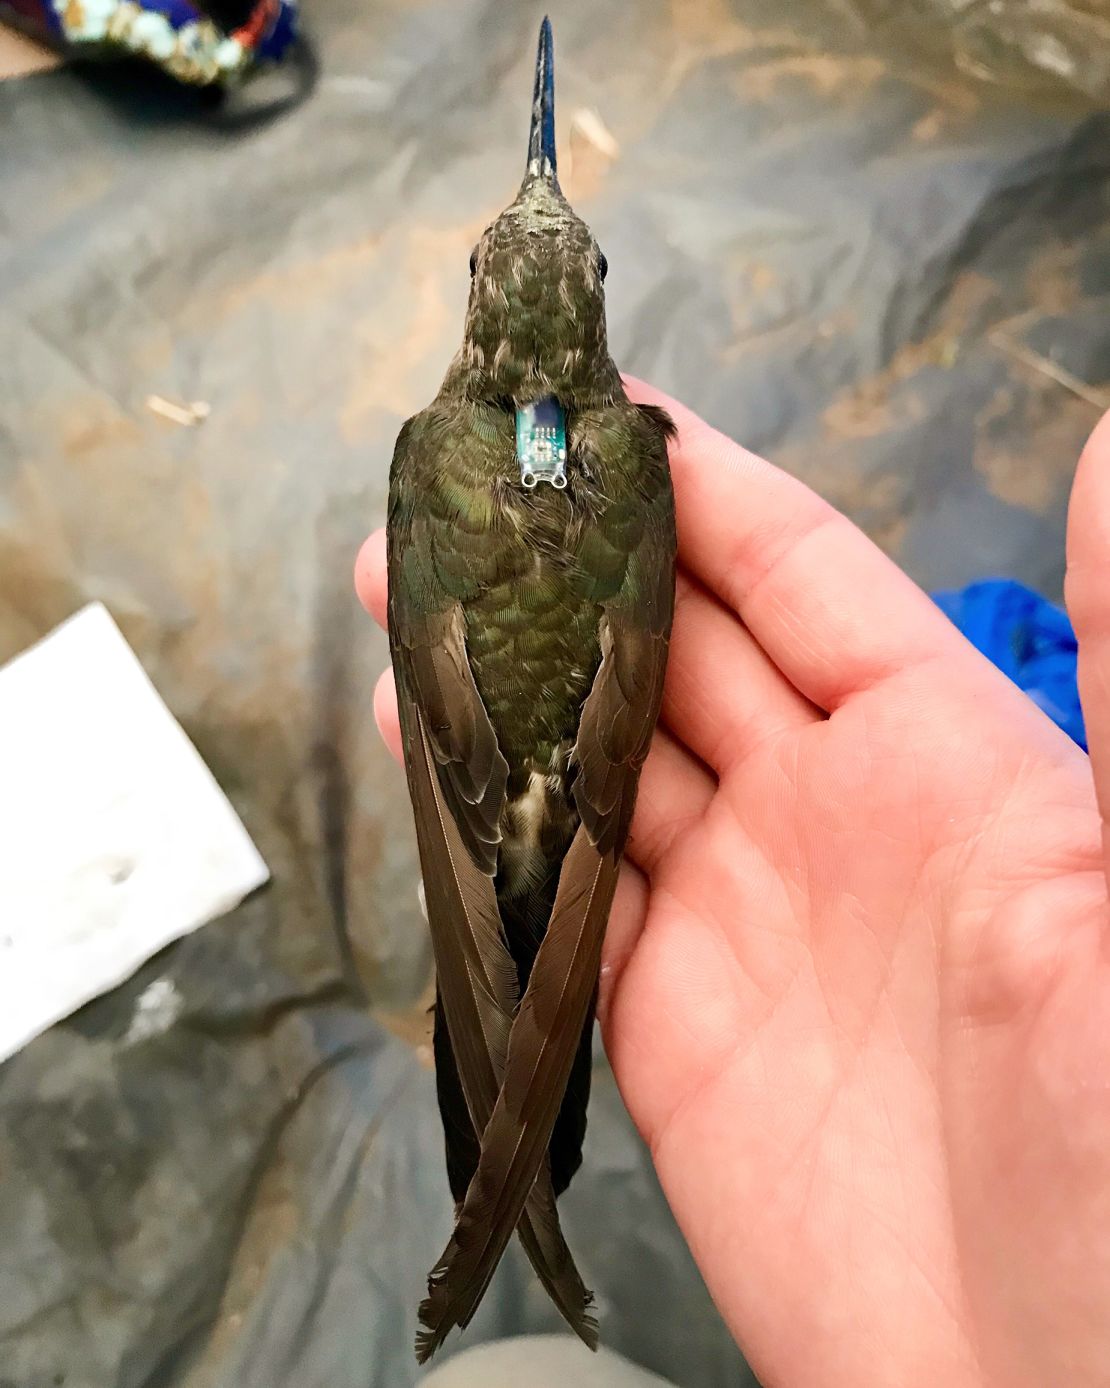 A giant southern hummingbird is equipped with a small backpack-like geolocator tracking device in central Chile.